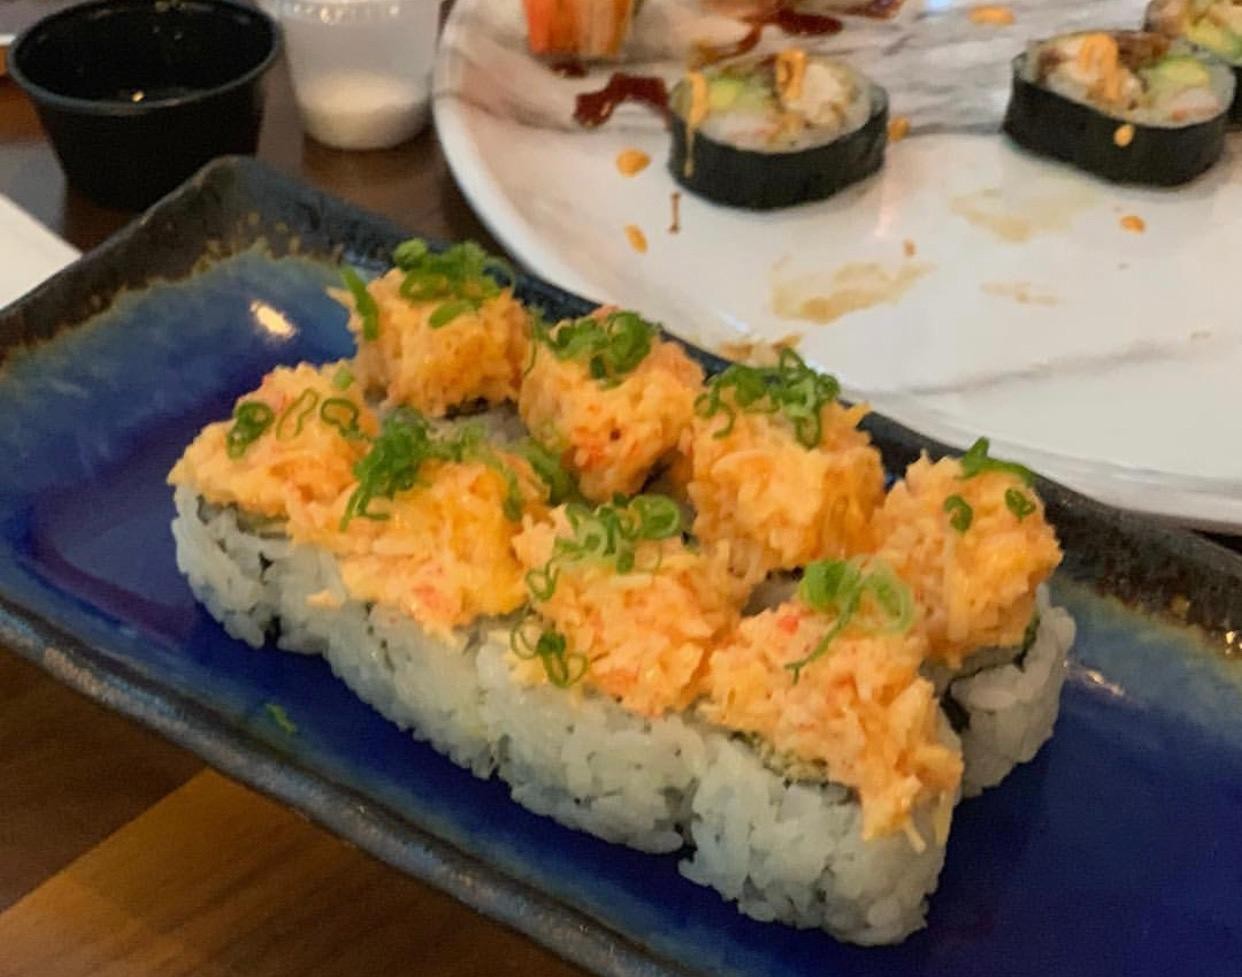 California Sweet Dream - California Roll Topped with baked shrimp & Crab Stick with Spice Mayo